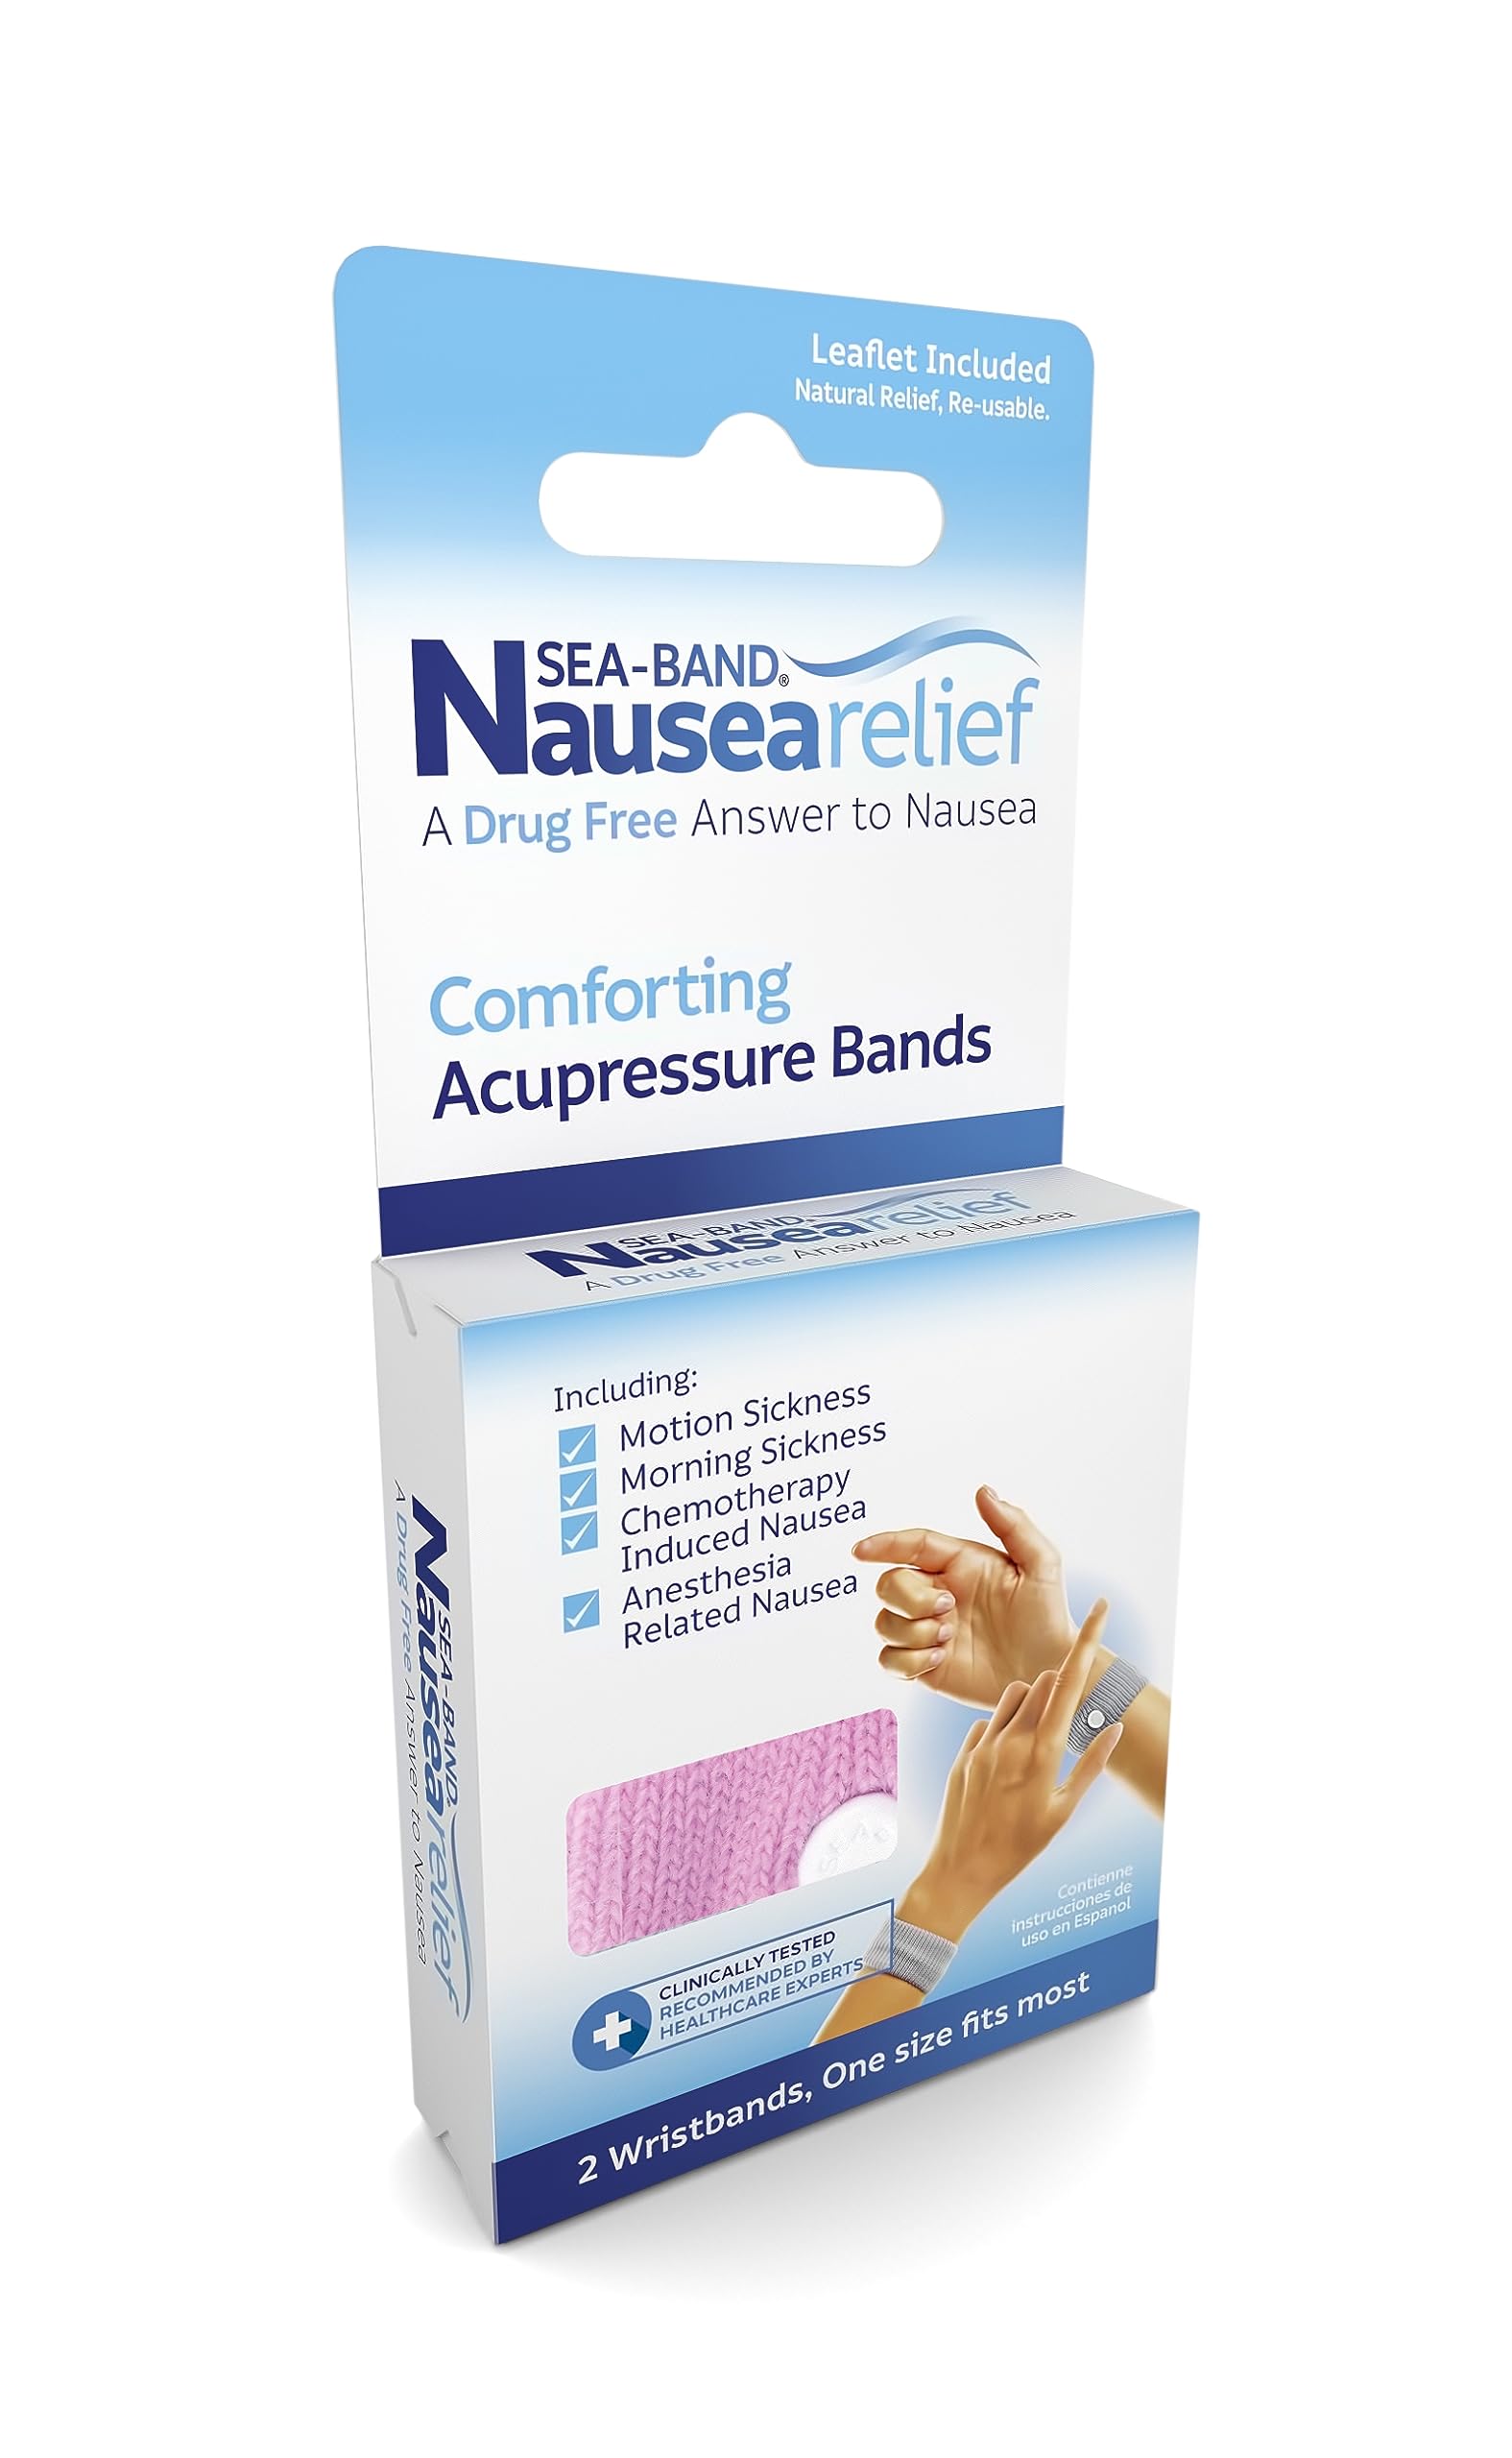 Sea-Band Anti-Nausea Acupressure Wristband for Motion & Morning Sickness - 1 Pair Pink